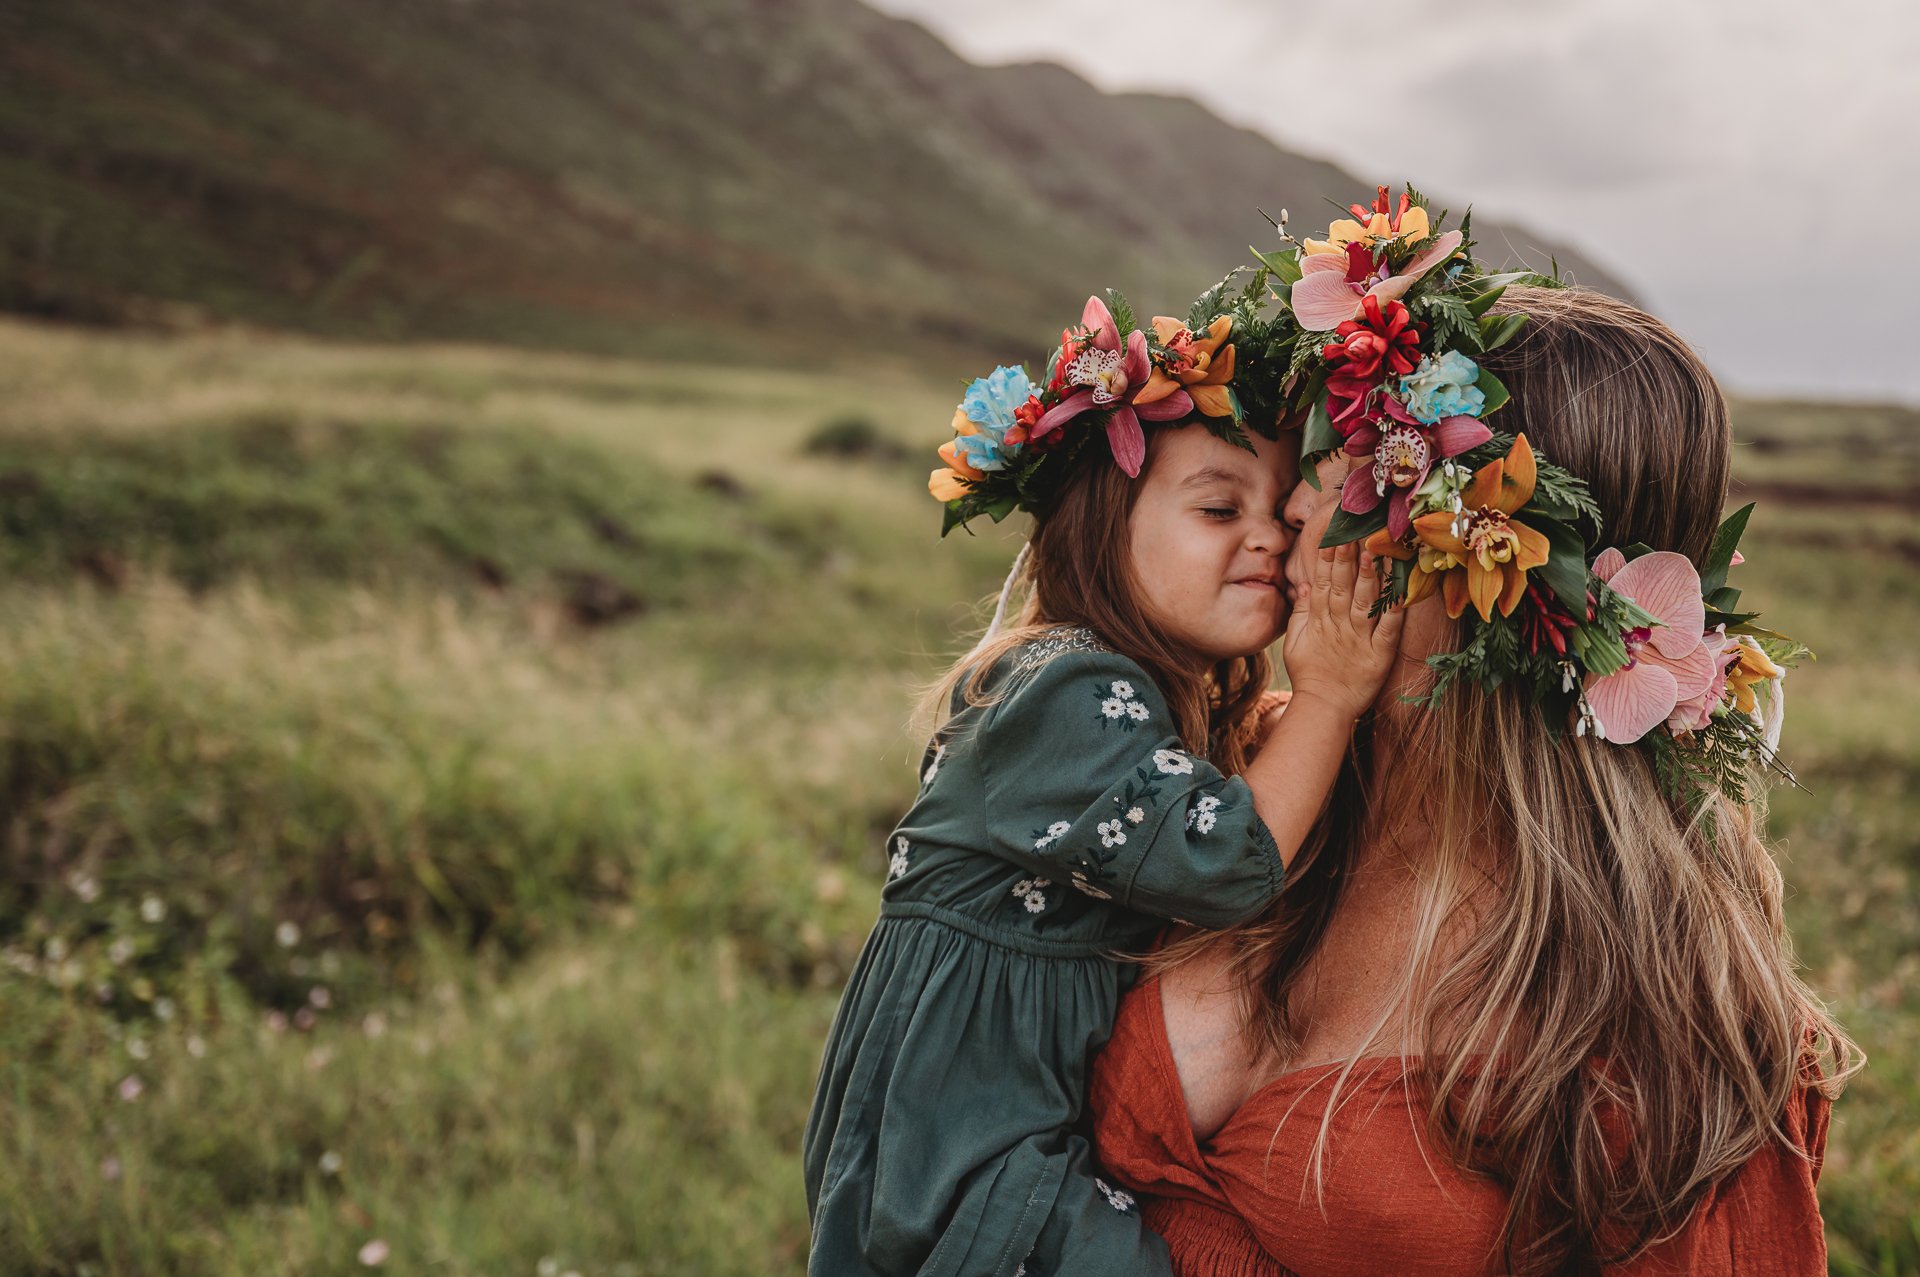 Kaena-Point-North-Shore-Oahu-Hawaii-Maternity-Session-Flower-Crown-Gown-Sarah-Elizabeth-Photos-and-film-maternity-3796.jpg